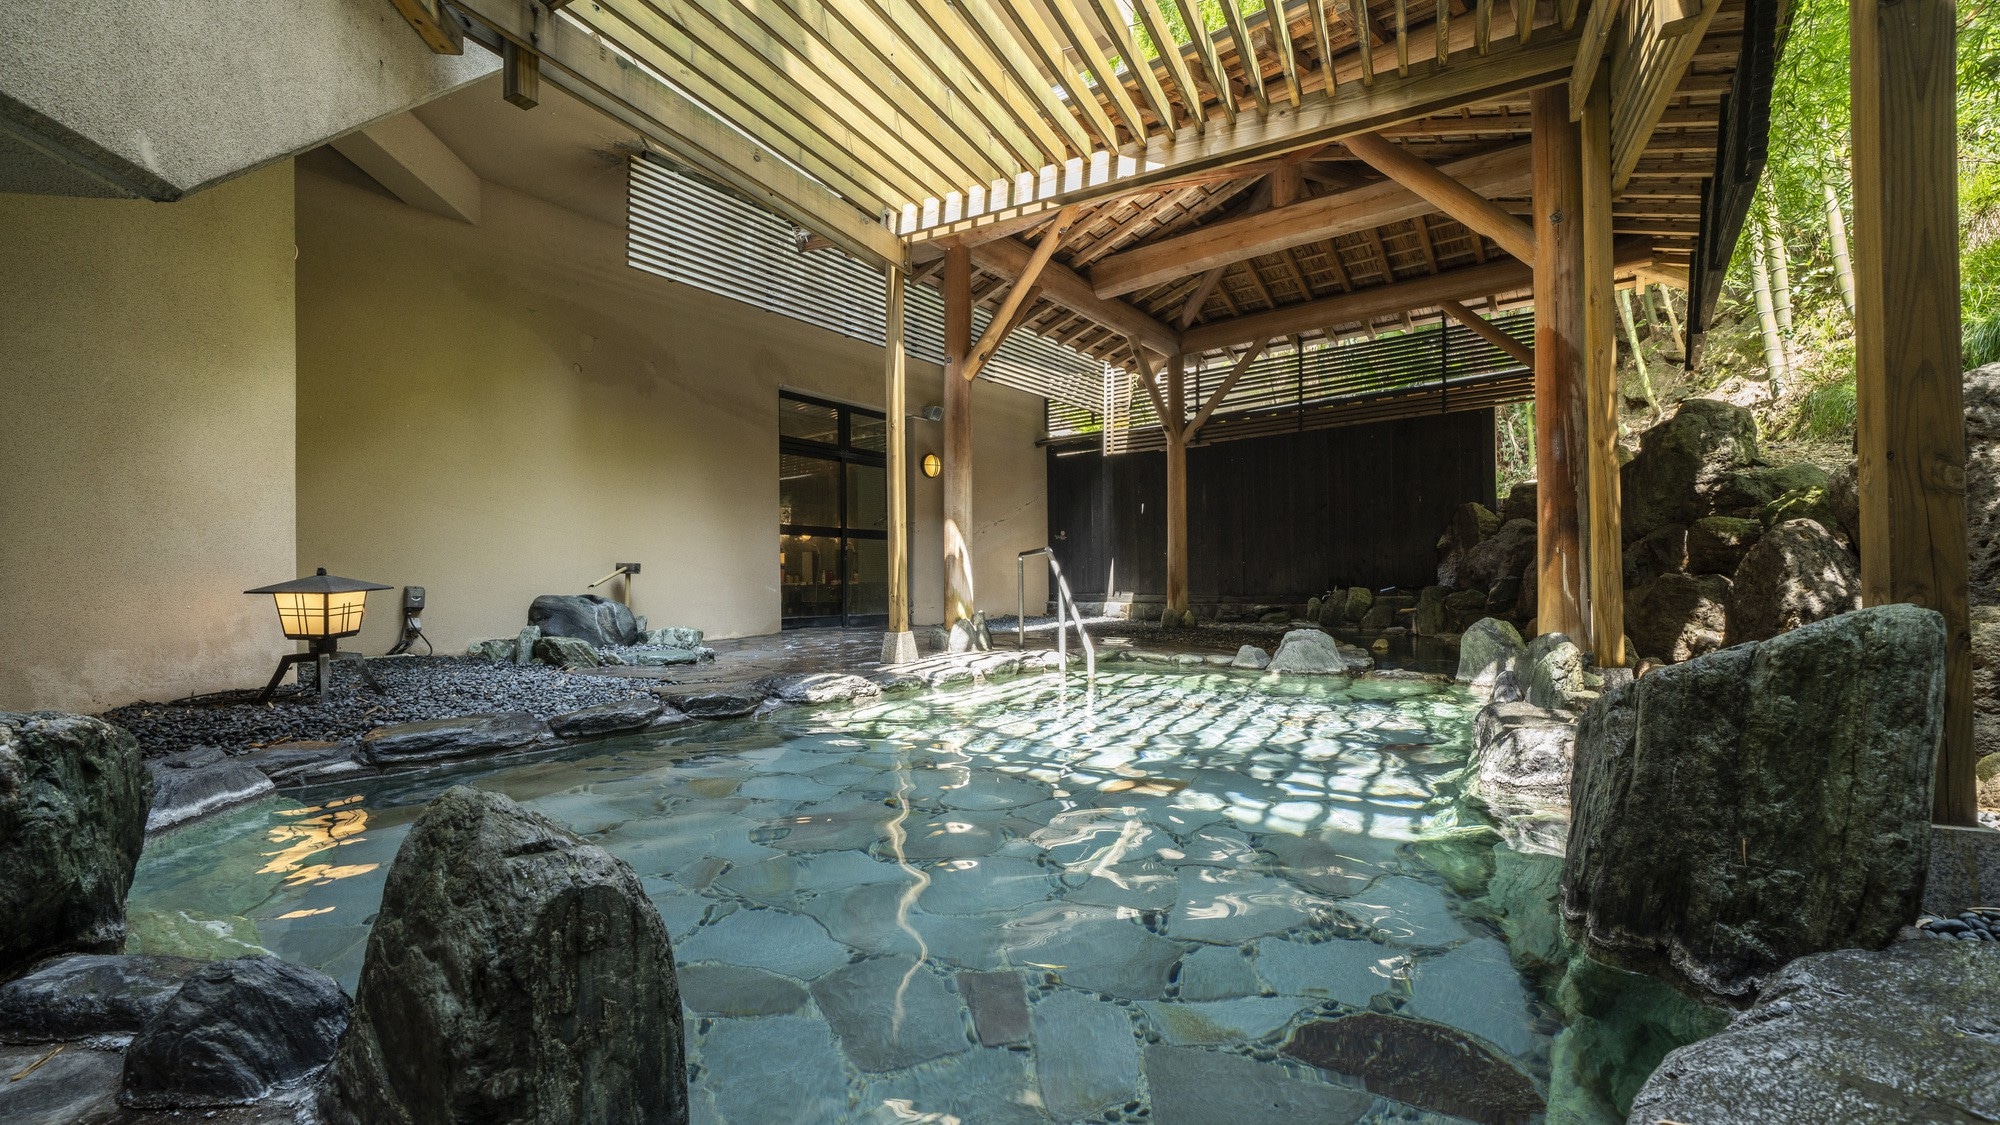 Yumura Onsen, which has prospered as a hot spring resort since the Heian period, is ideal for relaxing.